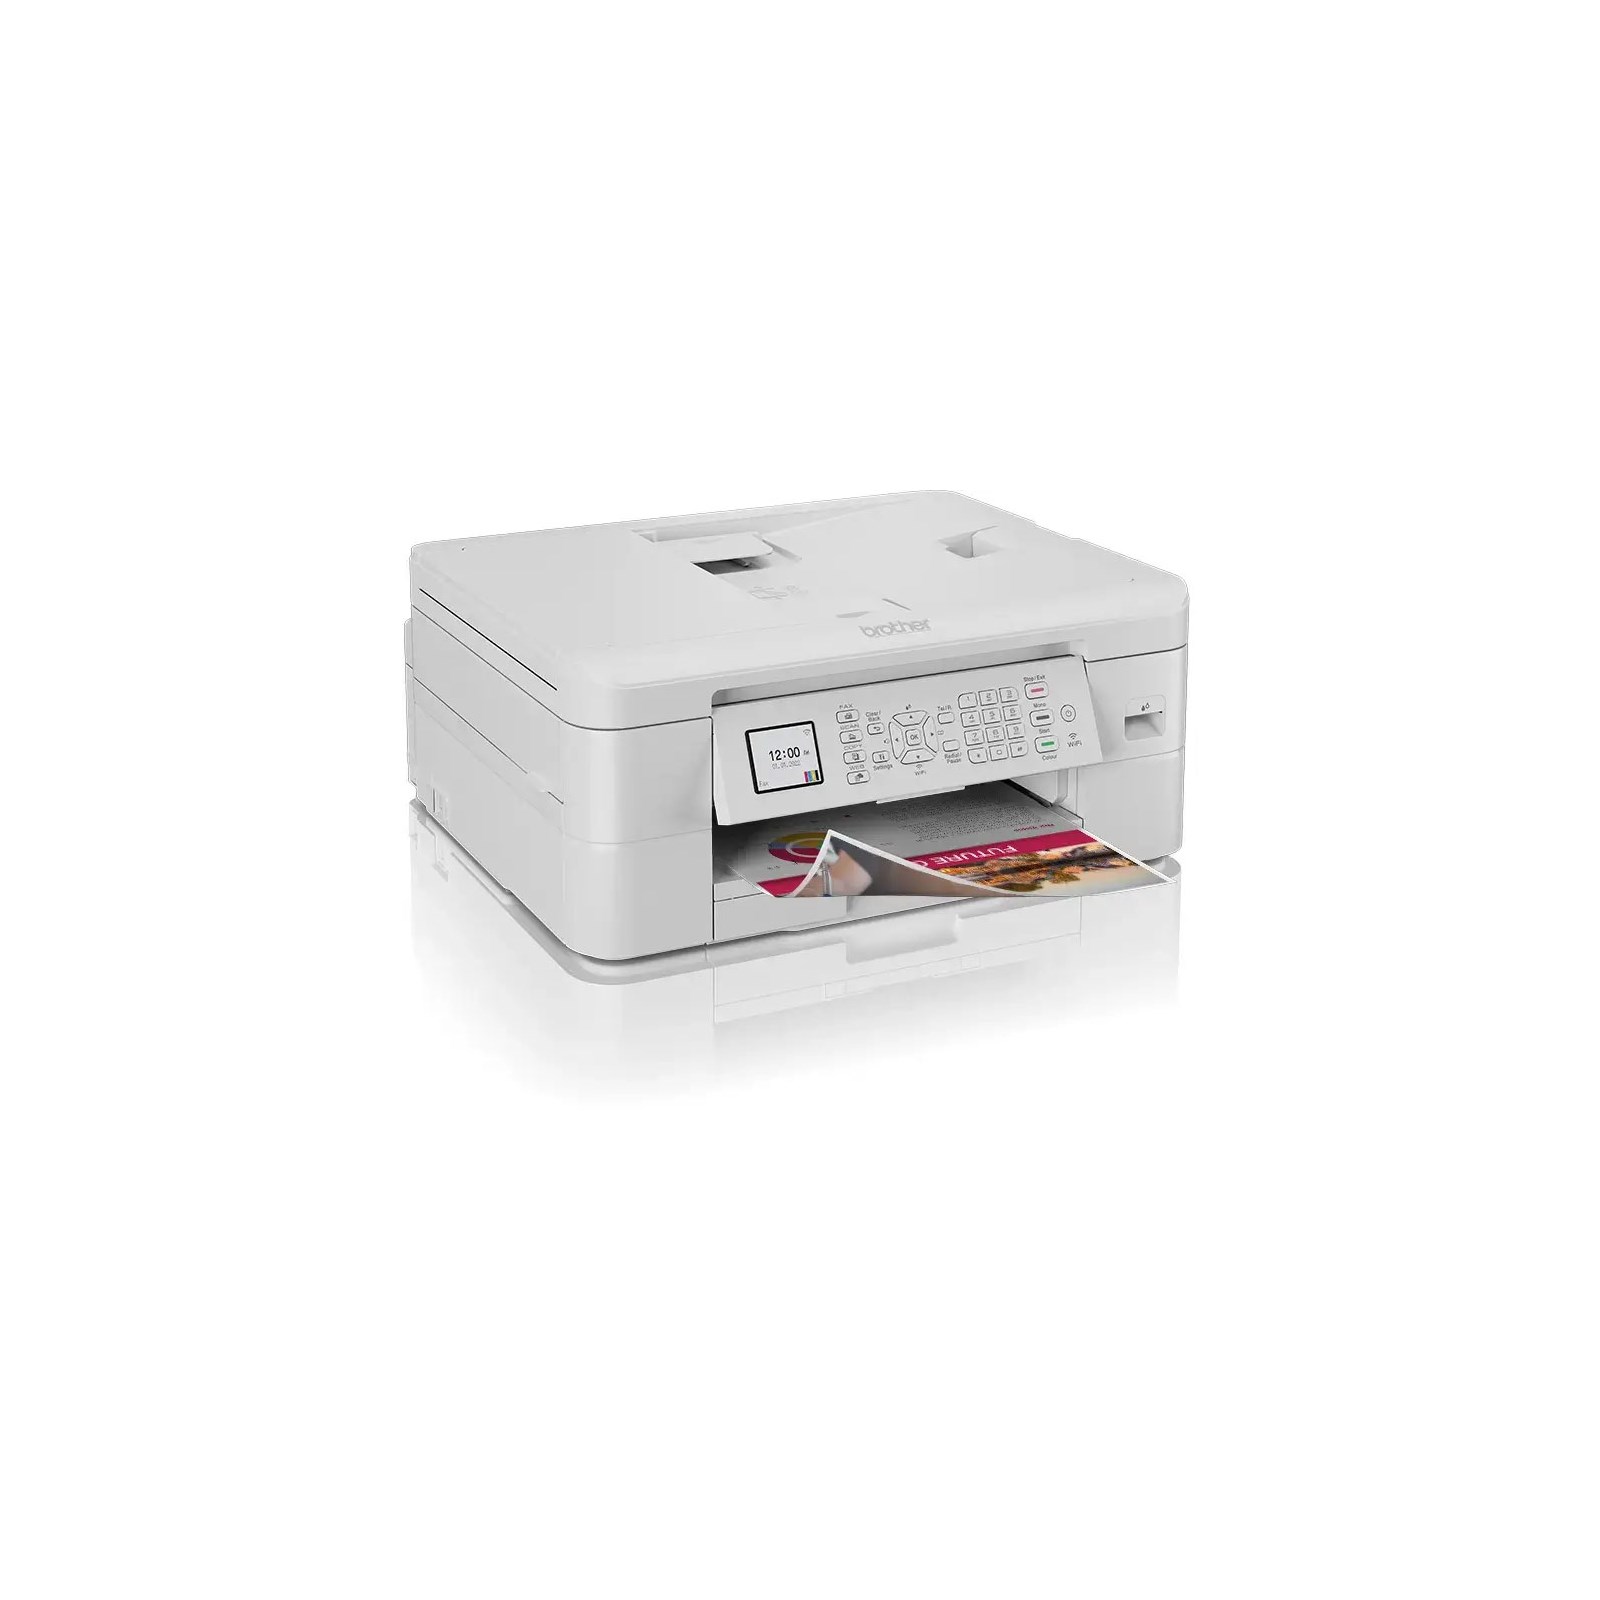 Wireless A4 4-in-1 personal printer - MFC-J1010DW